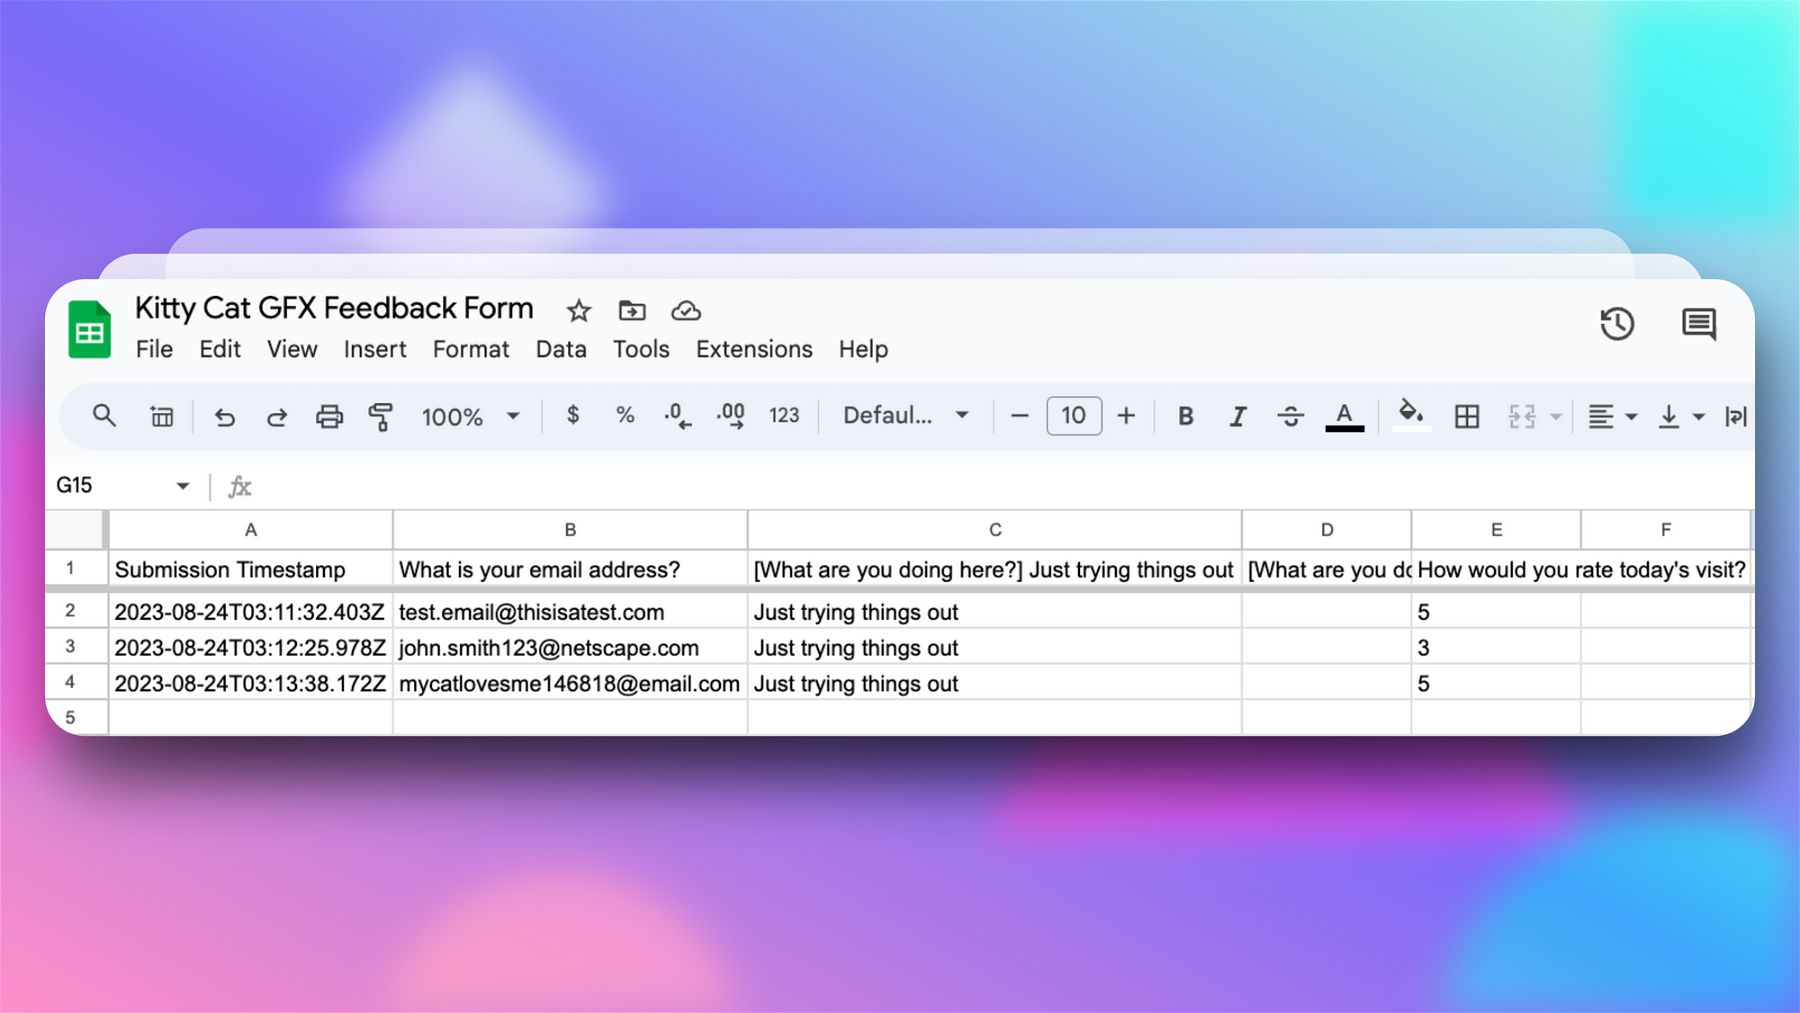 An example of what form responses may look like on Google Sheets.